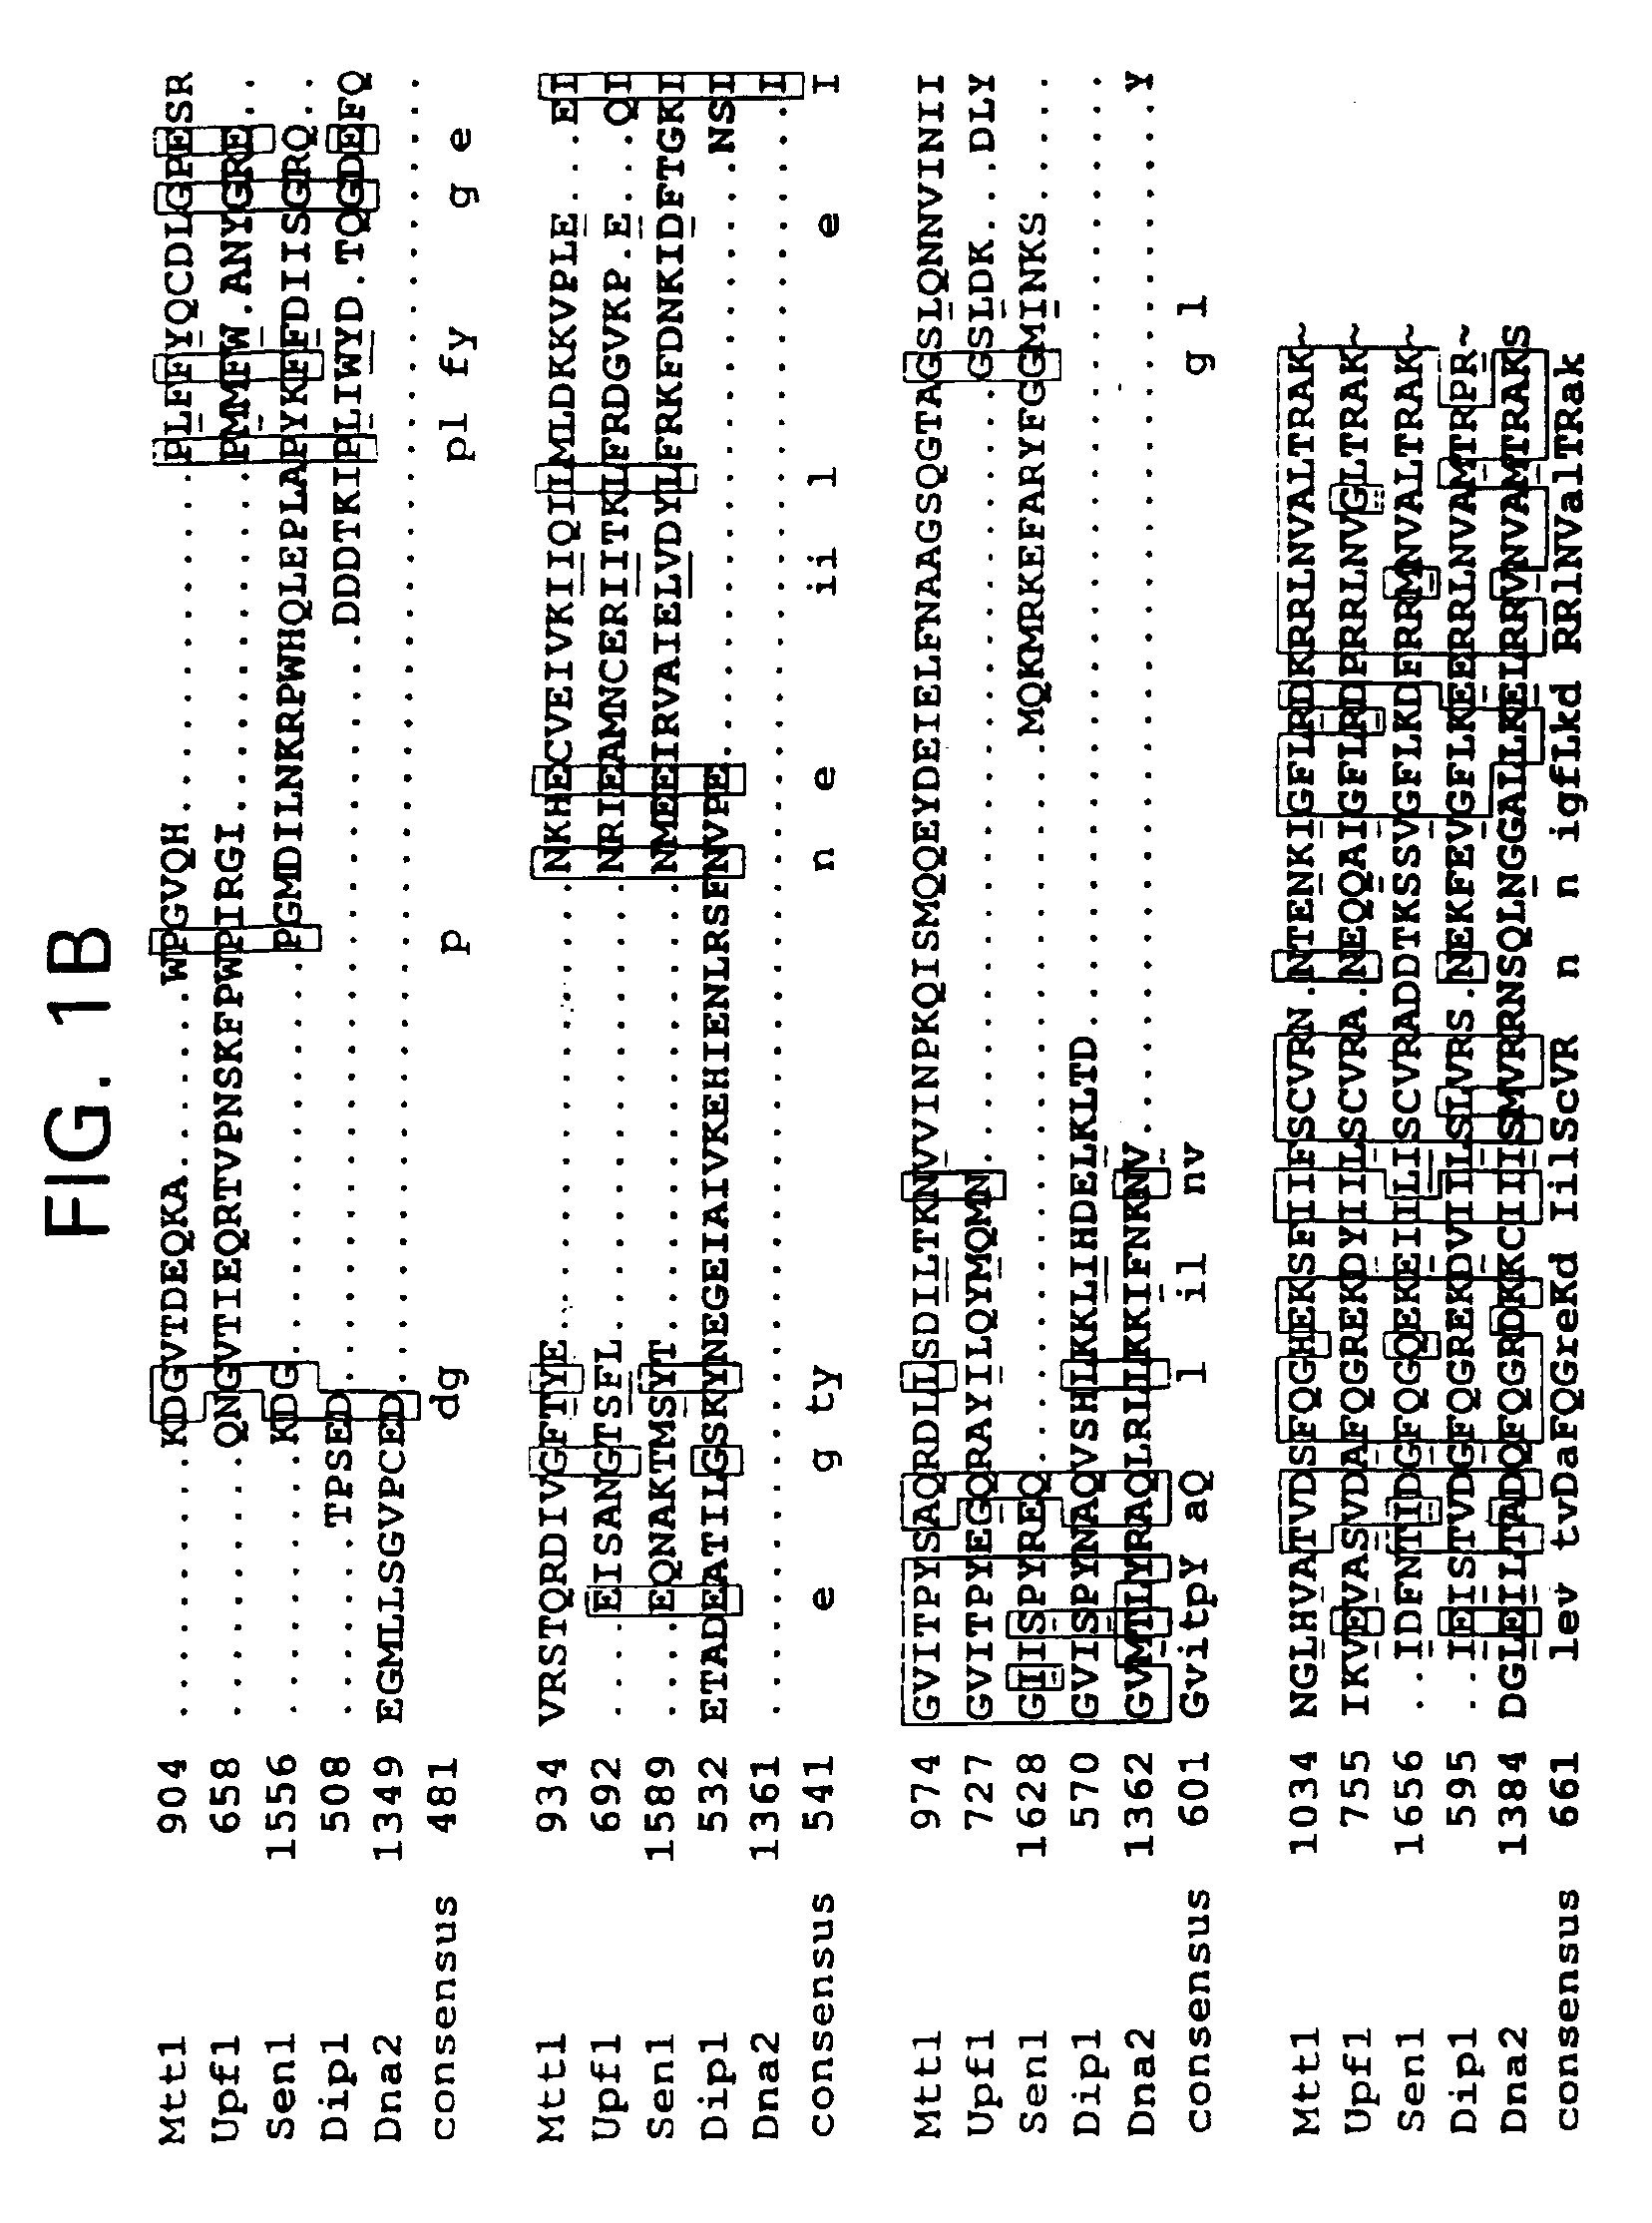 Subfamily of RNA helicases which are modulators of the fidelity of translation termination and uses thereof